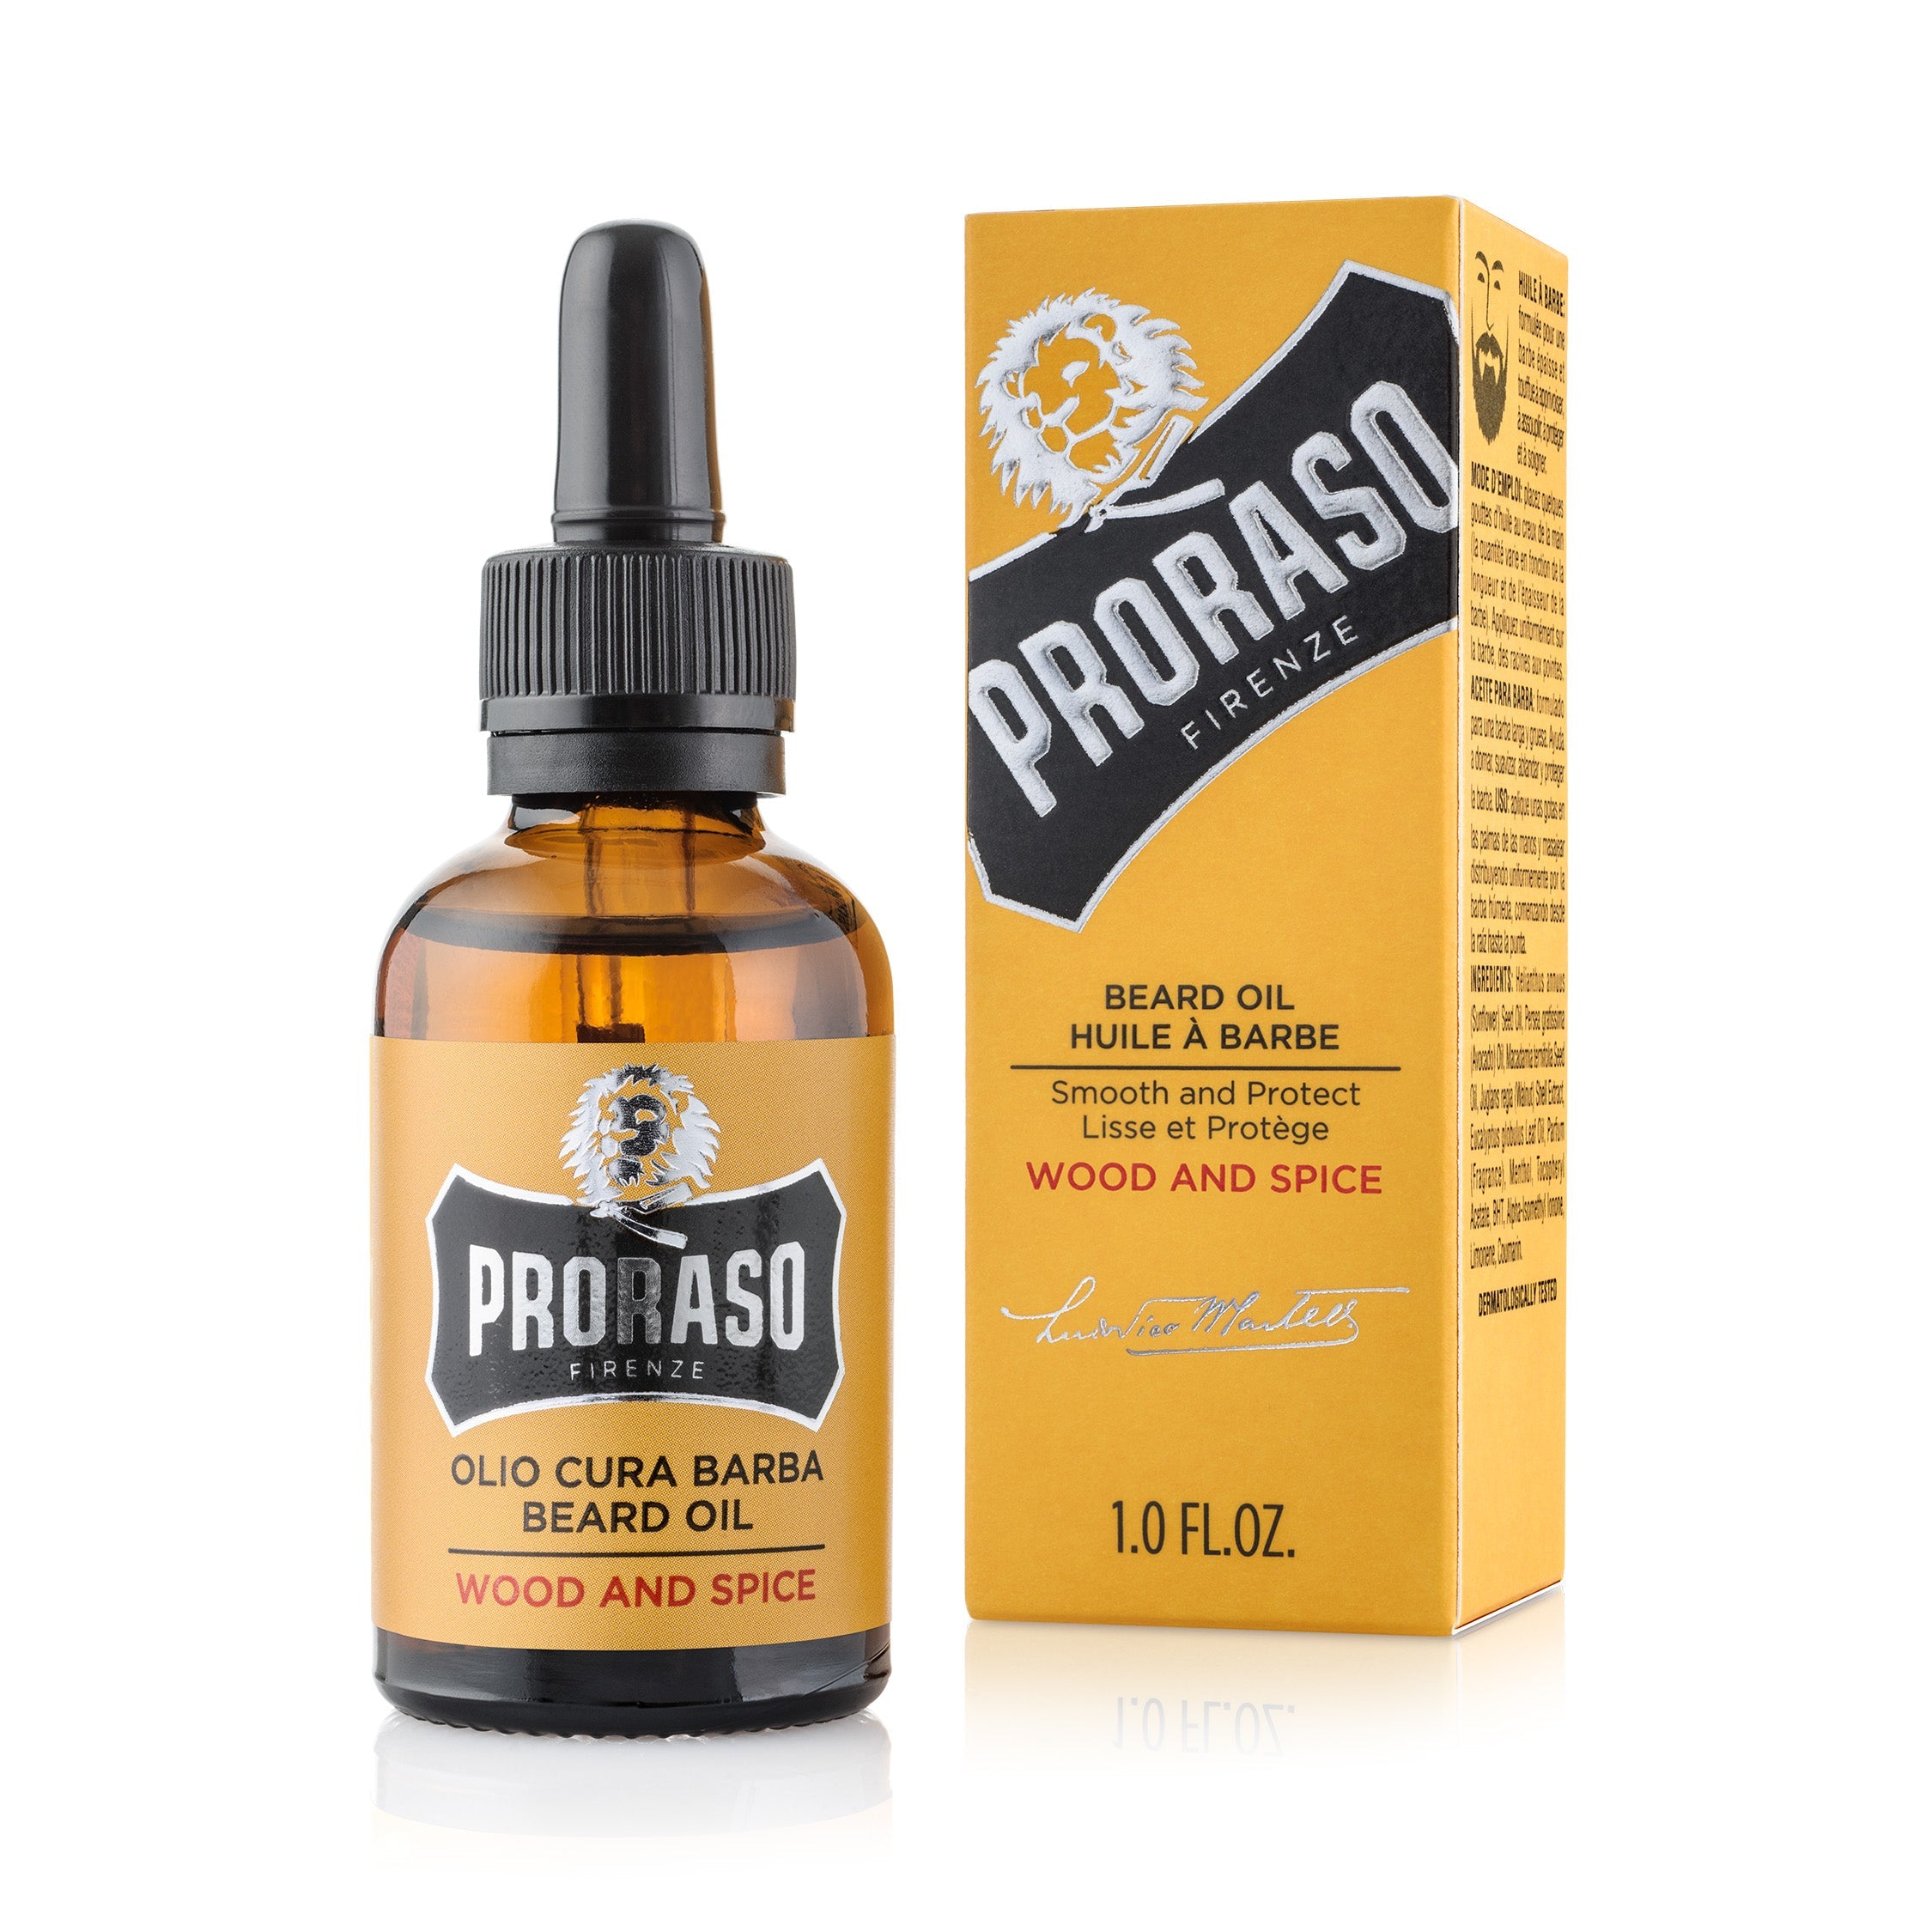 Proraso Beard Oil Wood And Spice